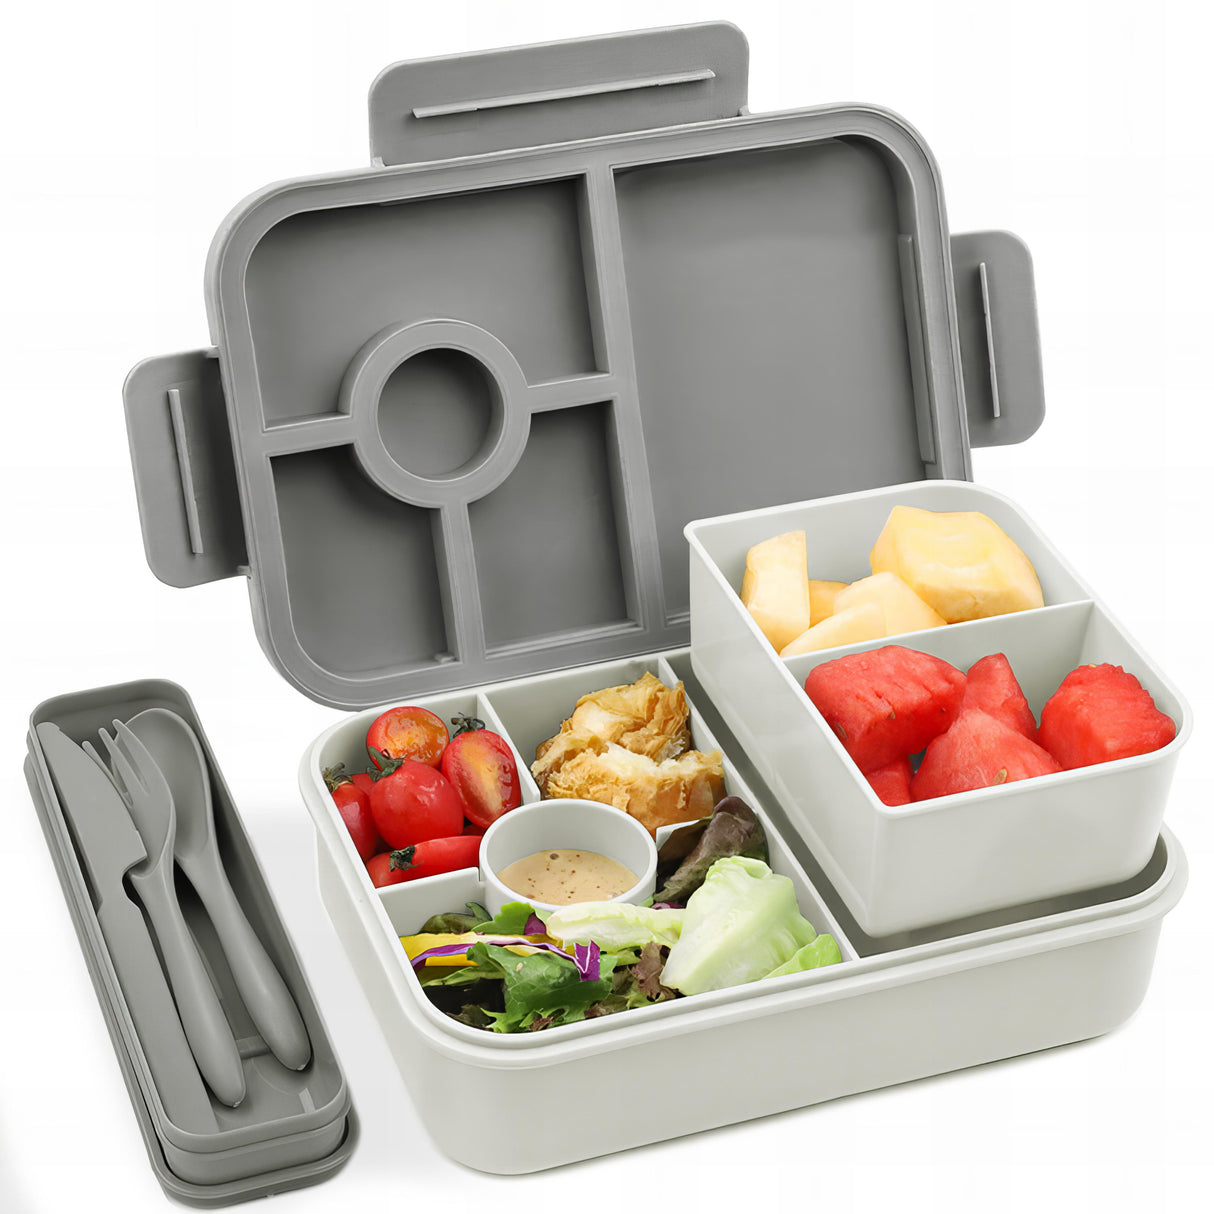 Lunch Box 1300ML,Kids Lunch Box Bento Boxes with 4 Compartments Cutlery,Leak-Proof